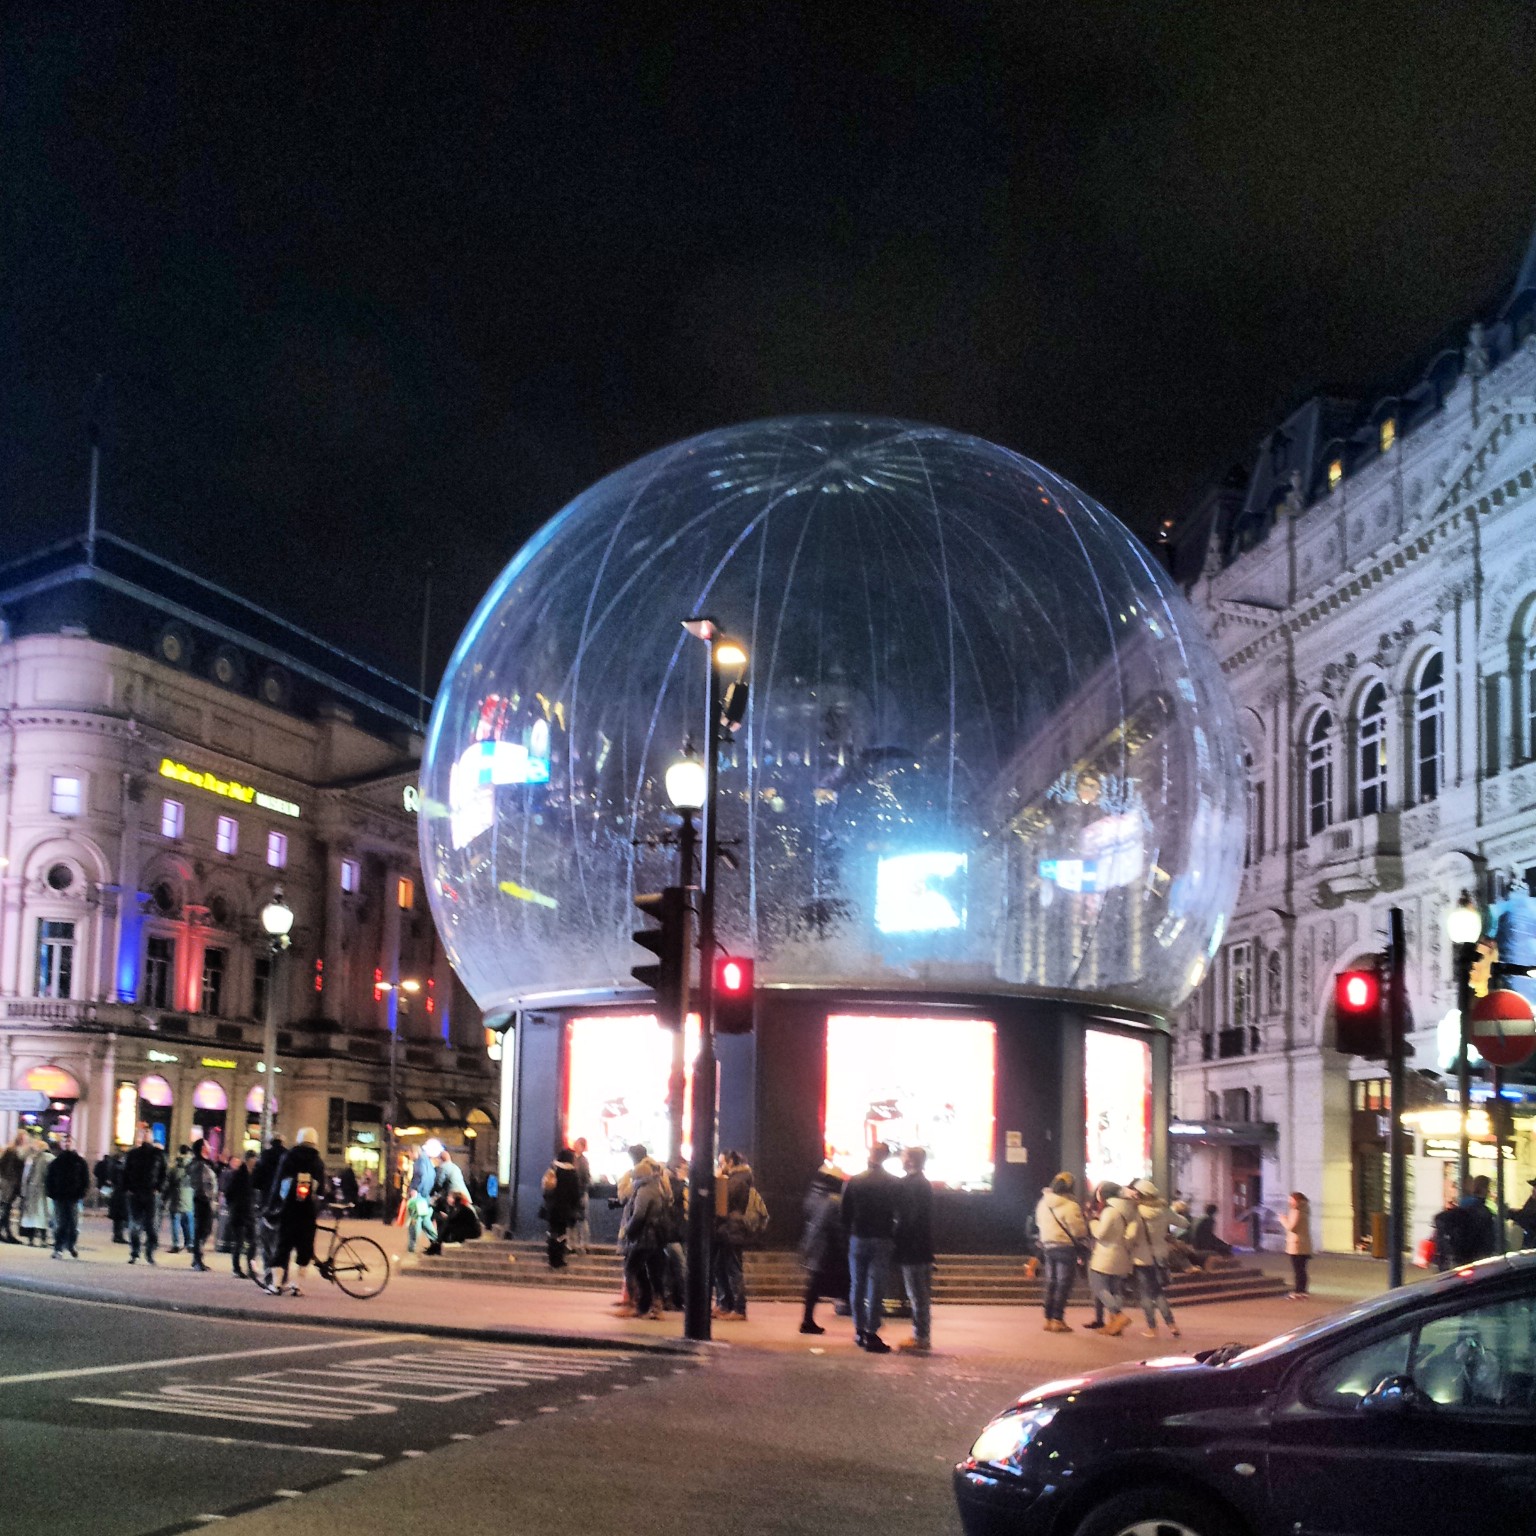 Christmas Lights and Decorations in London - Piccadilly